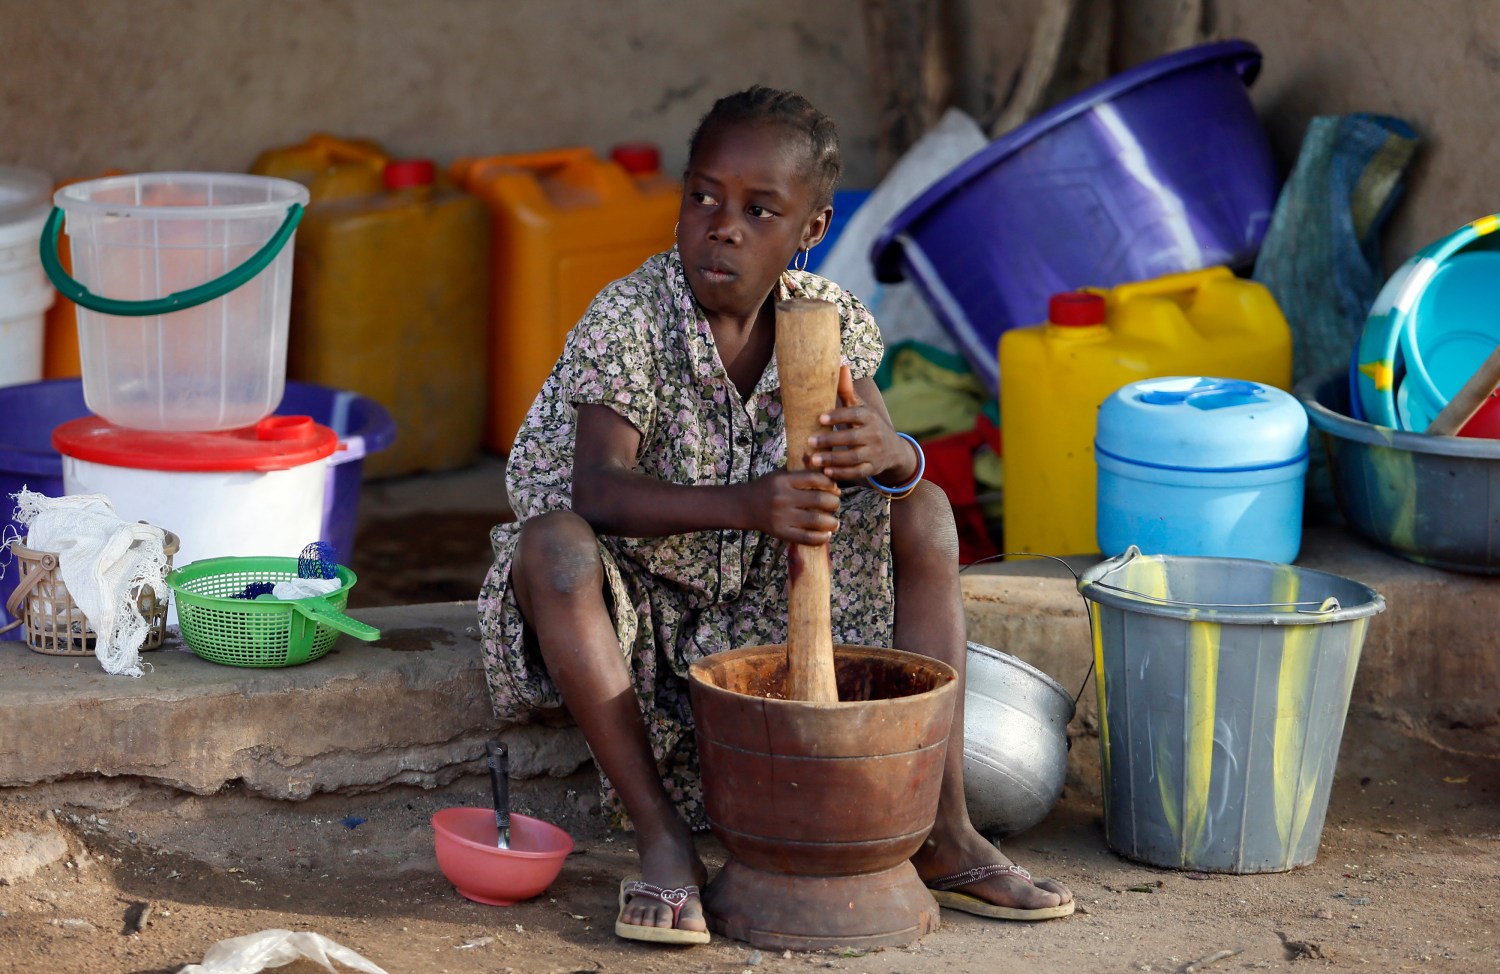 A girl displaced as a result of Boko Haram attacks in the northeast region of Nigeria, uses a mortar and pestle at a camp for internally displaced people in Yola, Adamawa State January 14, 2015. Boko Haram says it is building an Islamic state that will revive the glory days of northern Nigeria's medieval Muslim empires, but for those in its territory life is a litany of killings, kidnappings, hunger and economic collapse. Picture taken January 14. To match Insight NIGERIA-BOKOHARAM/     REUTERS/Afolabi Sotunde (NIGERIA - Tags: CIVIL UNREST SOCIETY EDUCATION) - GM1EB1K12UW01